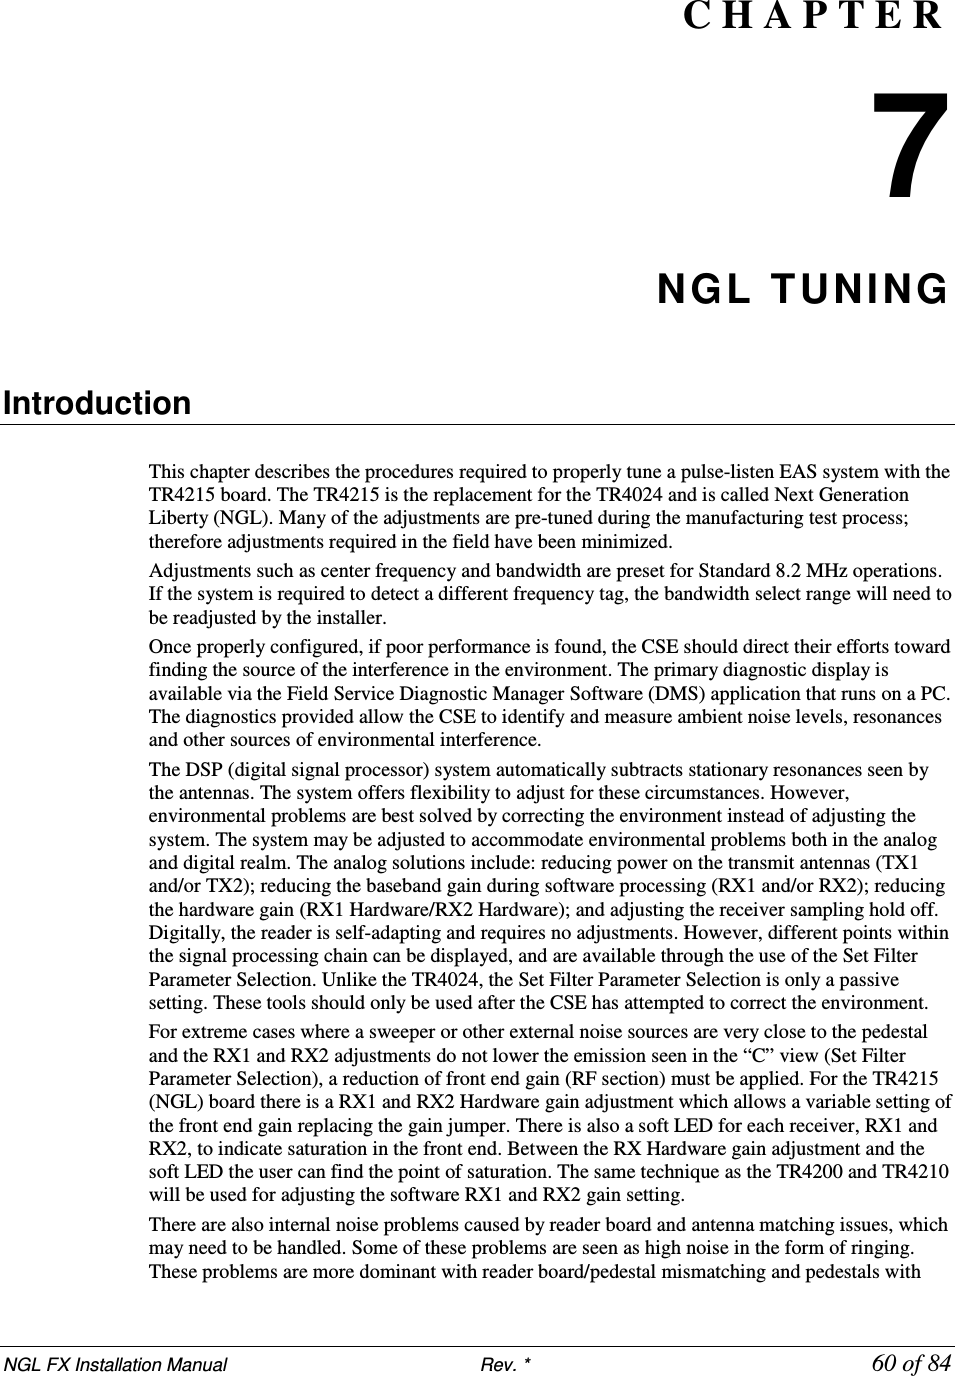 NGL FX Installation Manual                           Rev. *            60 of 84 C H A P T E R  7 NGL TUNING   Introduction  This chapter describes the procedures required to properly tune a pulse-listen EAS system with the TR4215 board. The TR4215 is the replacement for the TR4024 and is called Next Generation Liberty (NGL). Many of the adjustments are pre-tuned during the manufacturing test process; therefore adjustments required in the field have been minimized. Adjustments such as center frequency and bandwidth are preset for Standard 8.2 MHz operations. If the system is required to detect a different frequency tag, the bandwidth select range will need to be readjusted by the installer. Once properly configured, if poor performance is found, the CSE should direct their efforts toward finding the source of the interference in the environment. The primary diagnostic display is available via the Field Service Diagnostic Manager Software (DMS) application that runs on a PC. The diagnostics provided allow the CSE to identify and measure ambient noise levels, resonances and other sources of environmental interference.  The DSP (digital signal processor) system automatically subtracts stationary resonances seen by the antennas. The system offers flexibility to adjust for these circumstances. However, environmental problems are best solved by correcting the environment instead of adjusting the system. The system may be adjusted to accommodate environmental problems both in the analog and digital realm. The analog solutions include: reducing power on the transmit antennas (TX1 and/or TX2); reducing the baseband gain during software processing (RX1 and/or RX2); reducing the hardware gain (RX1 Hardware/RX2 Hardware); and adjusting the receiver sampling hold off. Digitally, the reader is self-adapting and requires no adjustments. However, different points within the signal processing chain can be displayed, and are available through the use of the Set Filter Parameter Selection. Unlike the TR4024, the Set Filter Parameter Selection is only a passive setting. These tools should only be used after the CSE has attempted to correct the environment. For extreme cases where a sweeper or other external noise sources are very close to the pedestal and the RX1 and RX2 adjustments do not lower the emission seen in the “C” view (Set Filter Parameter Selection), a reduction of front end gain (RF section) must be applied. For the TR4215 (NGL) board there is a RX1 and RX2 Hardware gain adjustment which allows a variable setting of the front end gain replacing the gain jumper. There is also a soft LED for each receiver, RX1 and RX2, to indicate saturation in the front end. Between the RX Hardware gain adjustment and the soft LED the user can find the point of saturation. The same technique as the TR4200 and TR4210 will be used for adjusting the software RX1 and RX2 gain setting.  There are also internal noise problems caused by reader board and antenna matching issues, which may need to be handled. Some of these problems are seen as high noise in the form of ringing. These problems are more dominant with reader board/pedestal mismatching and pedestals with 